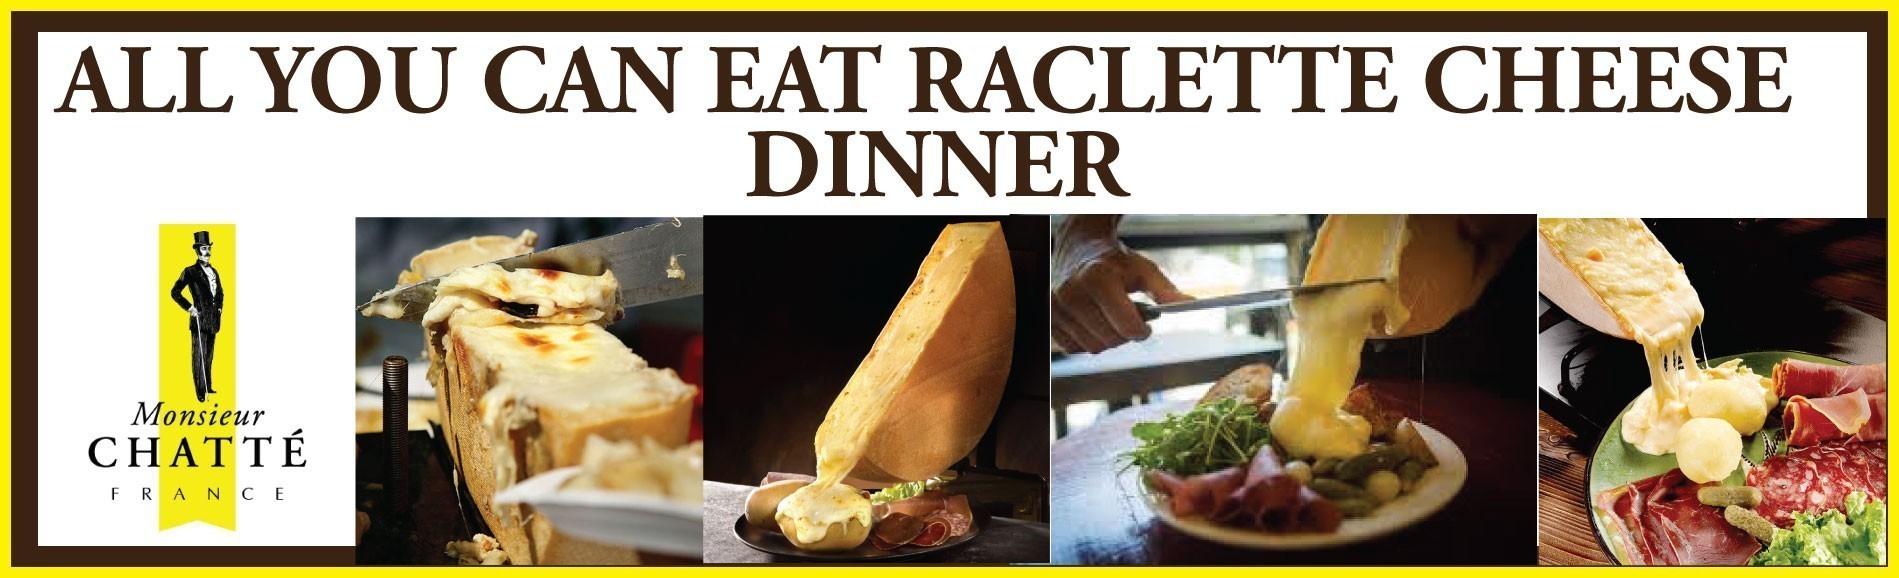 All You Can Eat Raclette Dinner